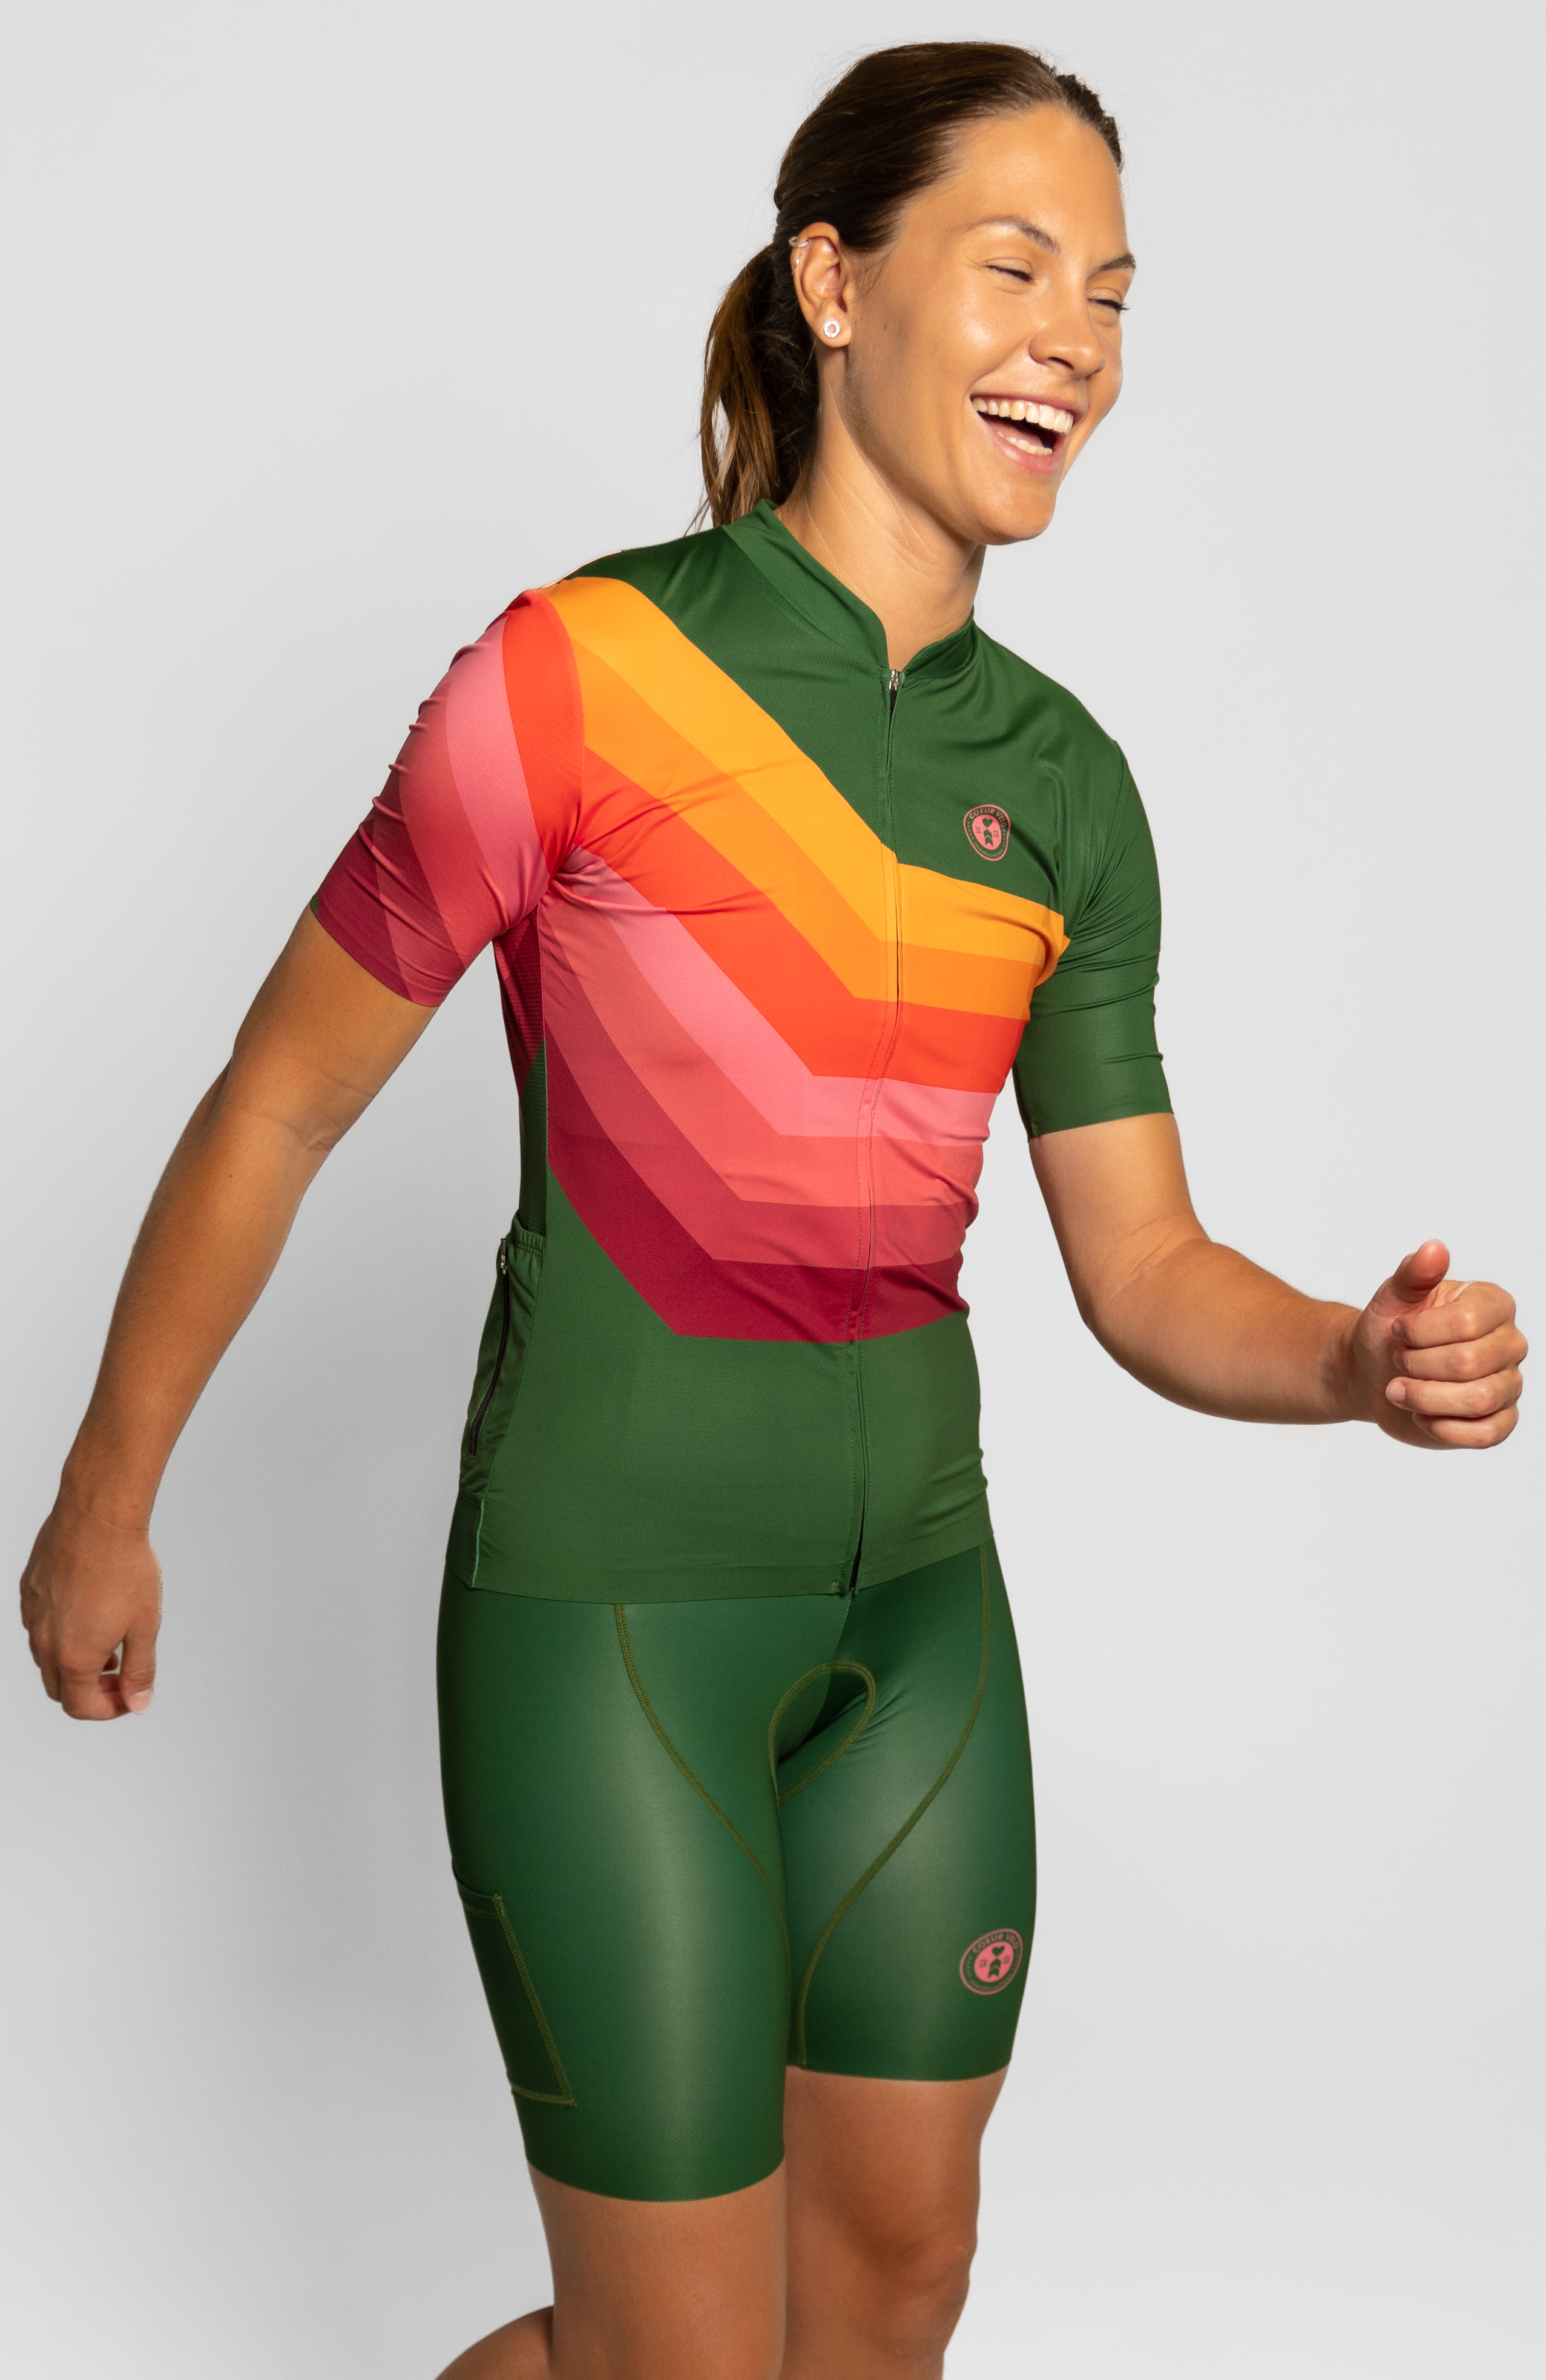 Coeur Sports Cycling Jersey Forest Cycling Jersey